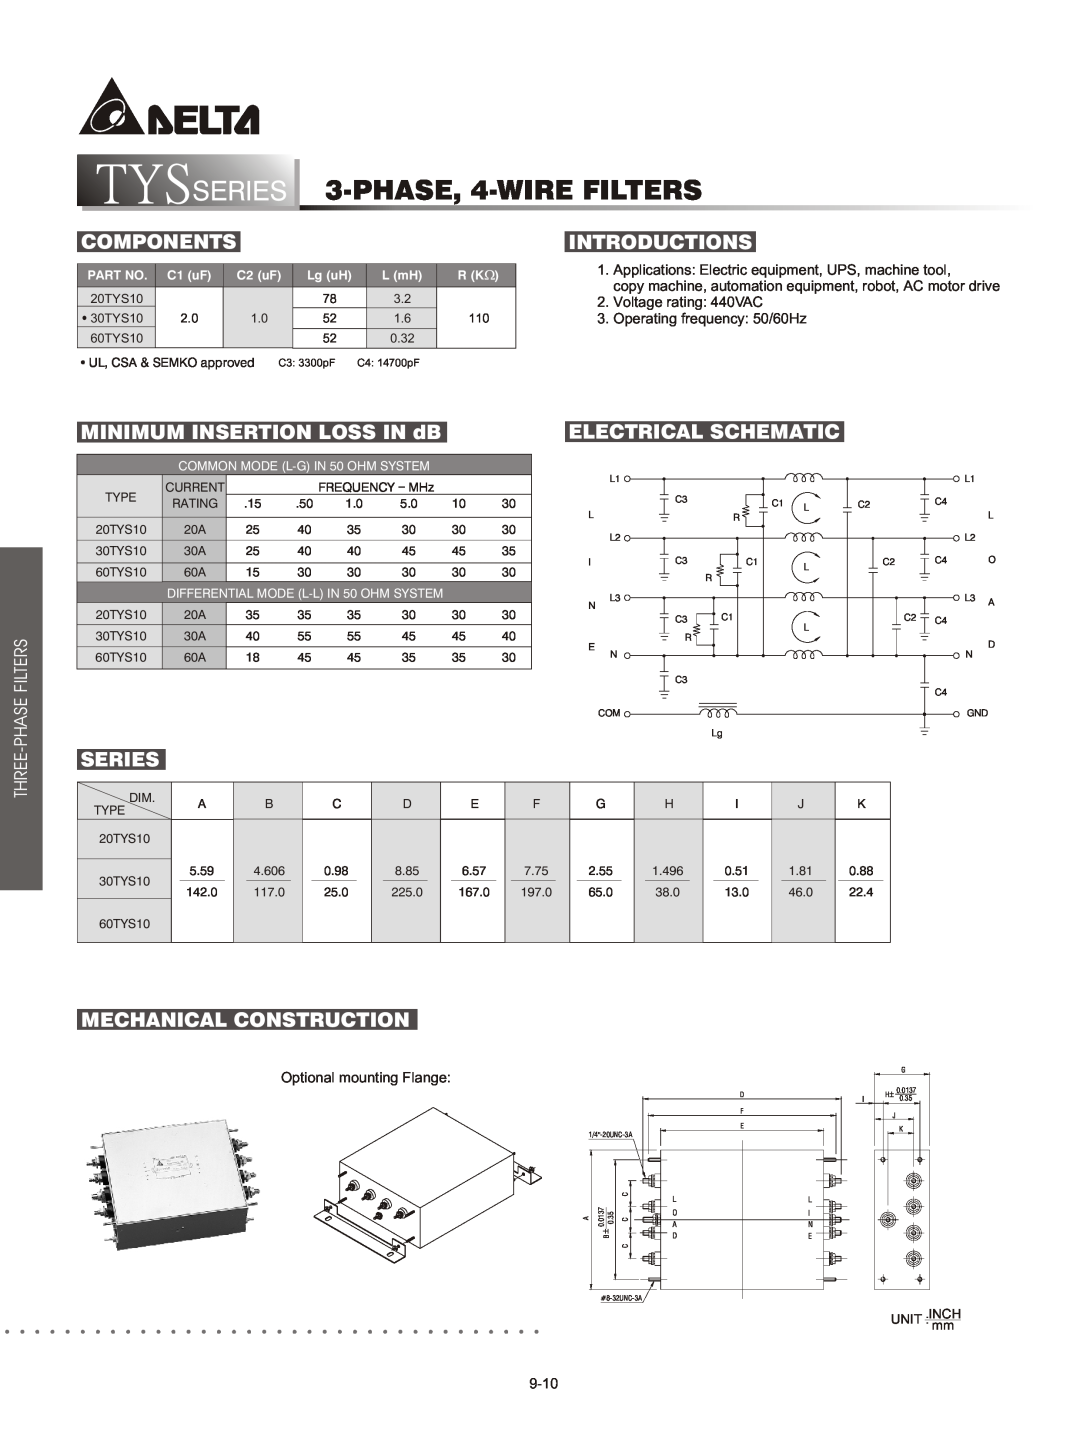 Delta Electronics DTD Series manual SERIES 3-PHASE, 4-WIRE FILTERS, Components, Introductions, Electrical Schematic, Phase 